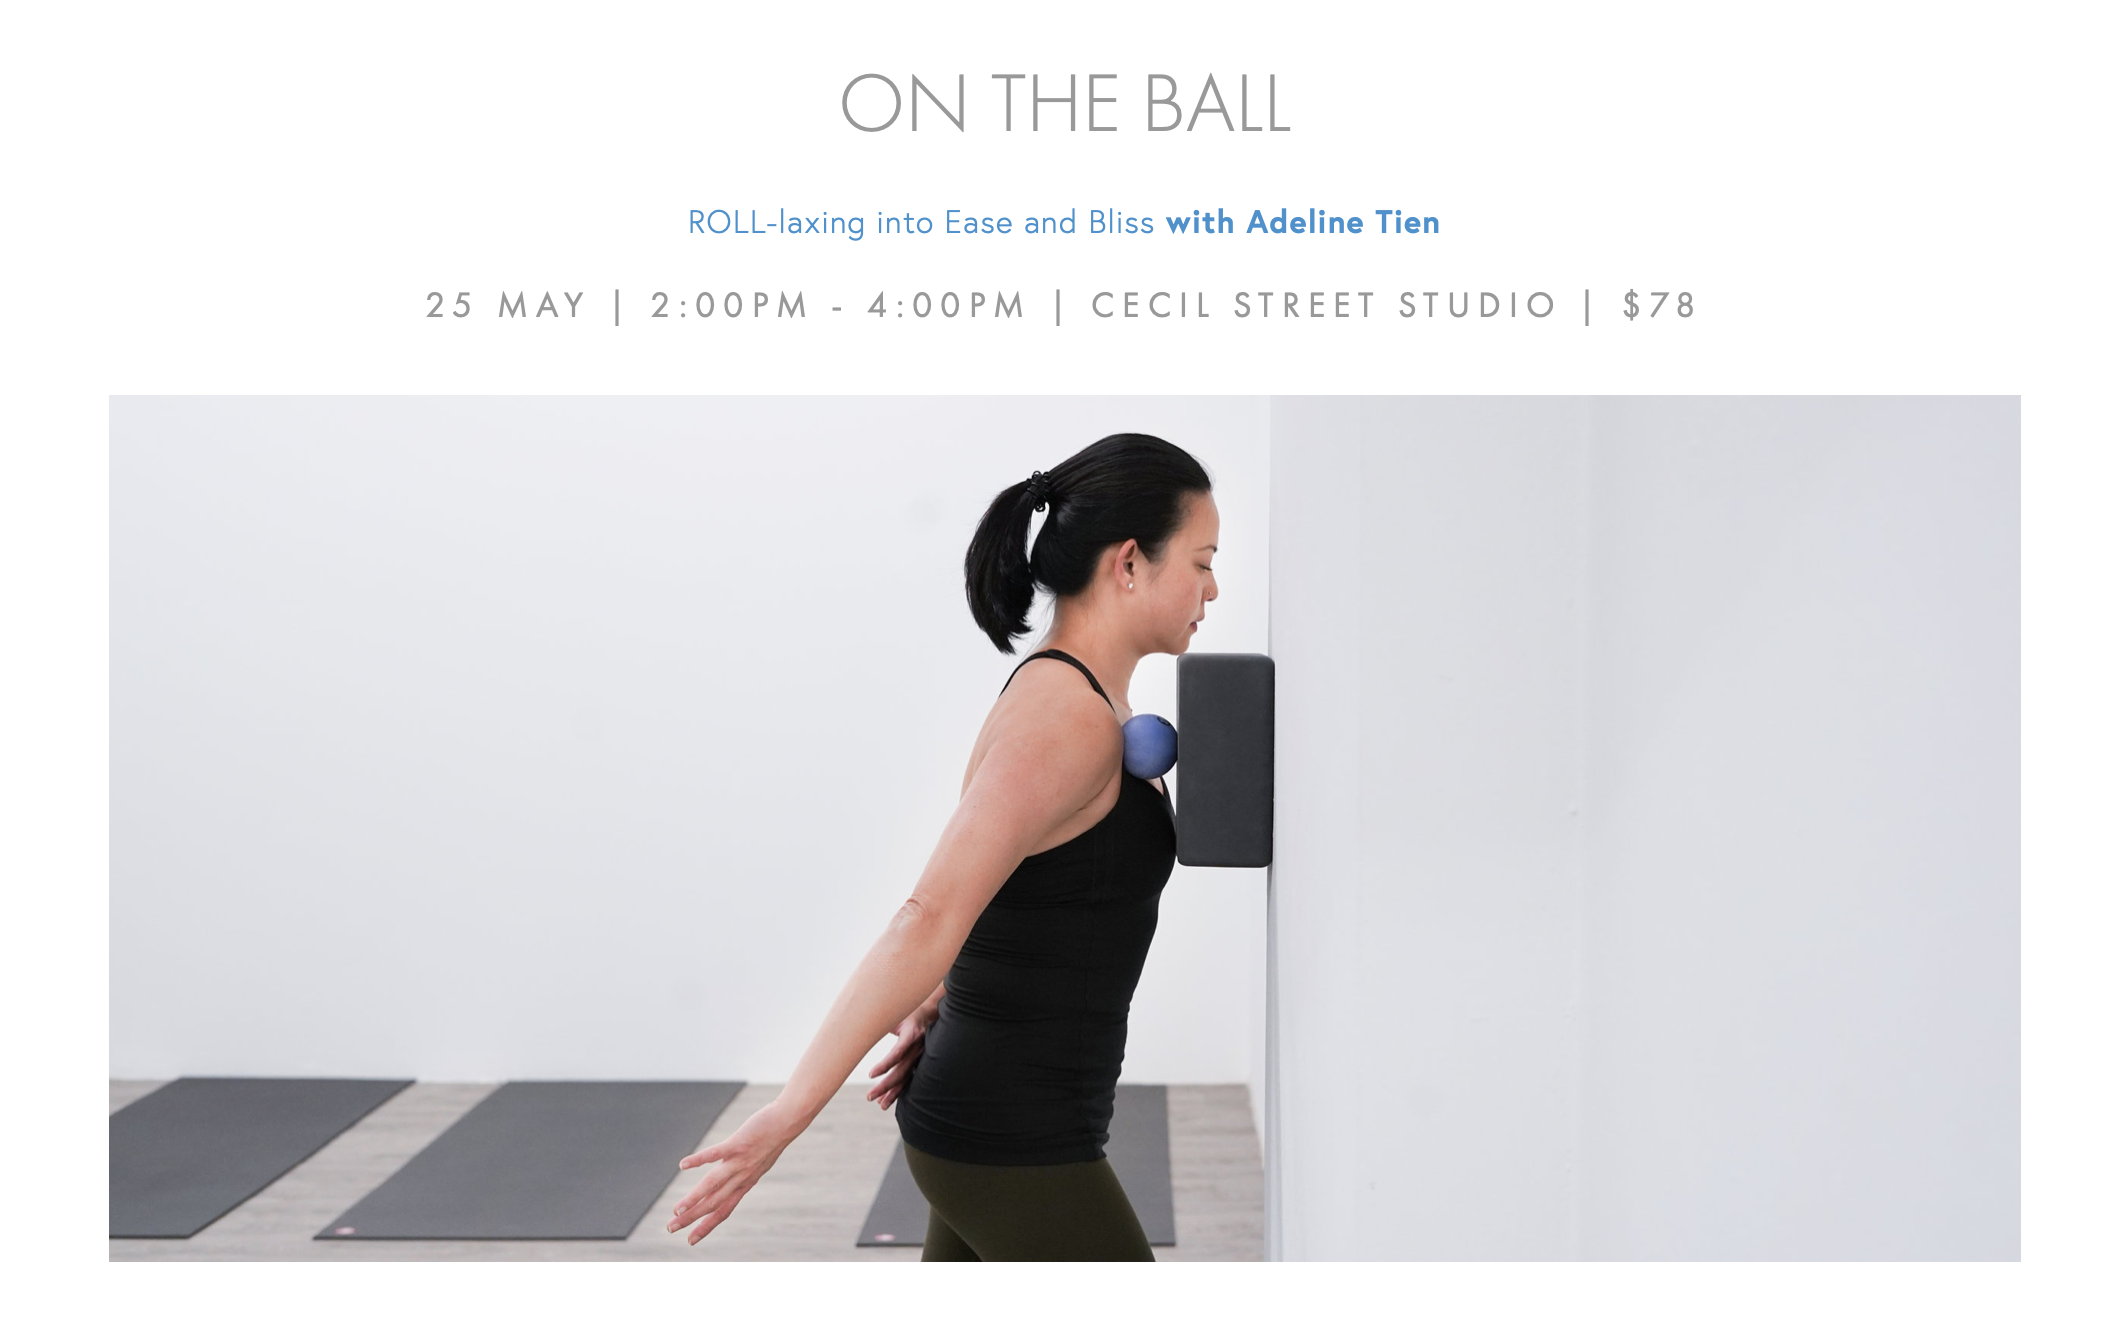 ROLL-laxing into Ease and Bliss at Freedom Yoga 25 May 2019